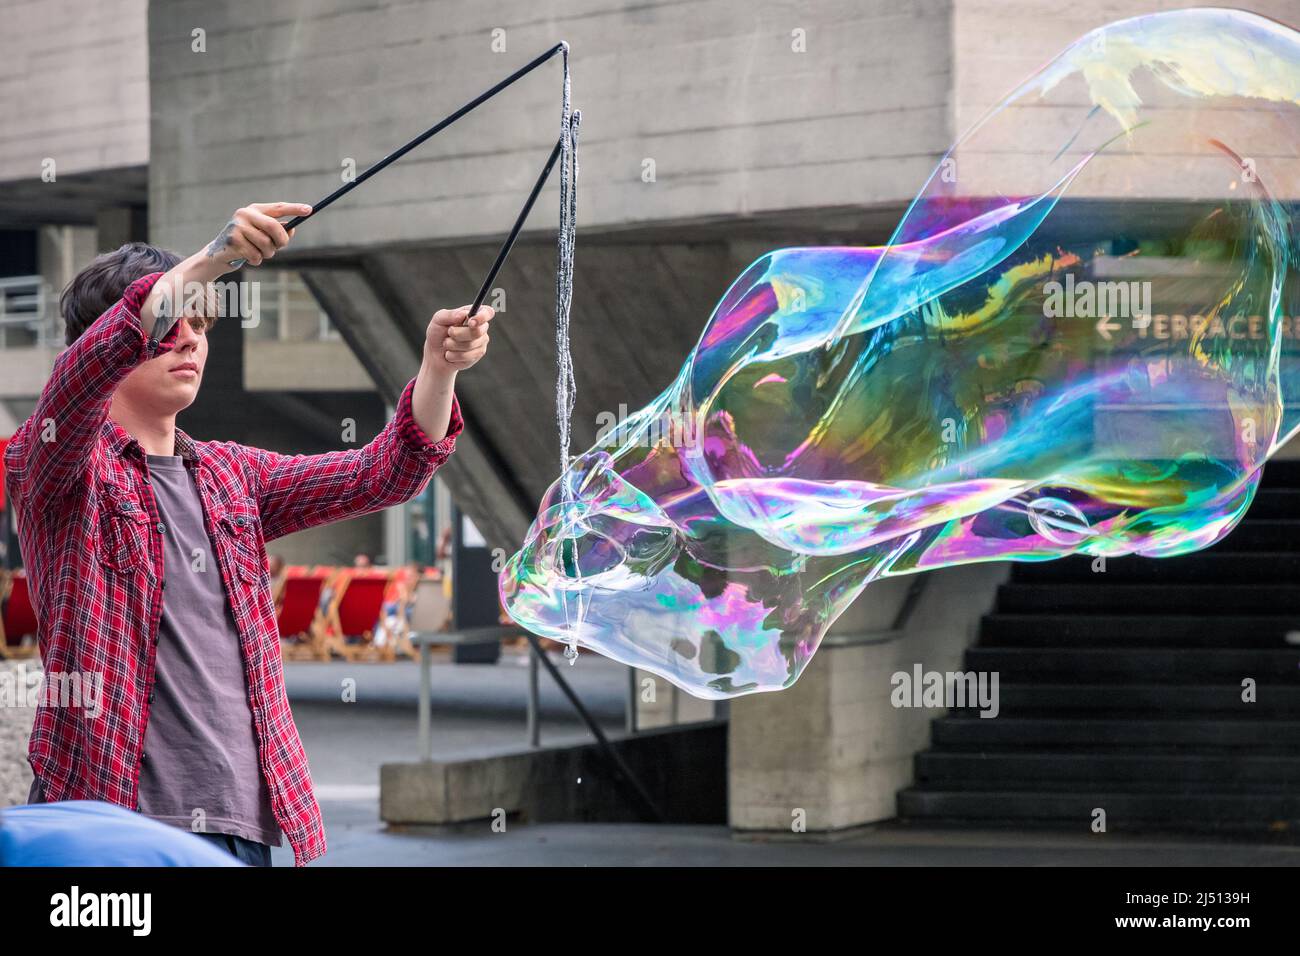 London, UK - July 19, 2021 - A soap bubble street performer around South Bank area Stock Photo